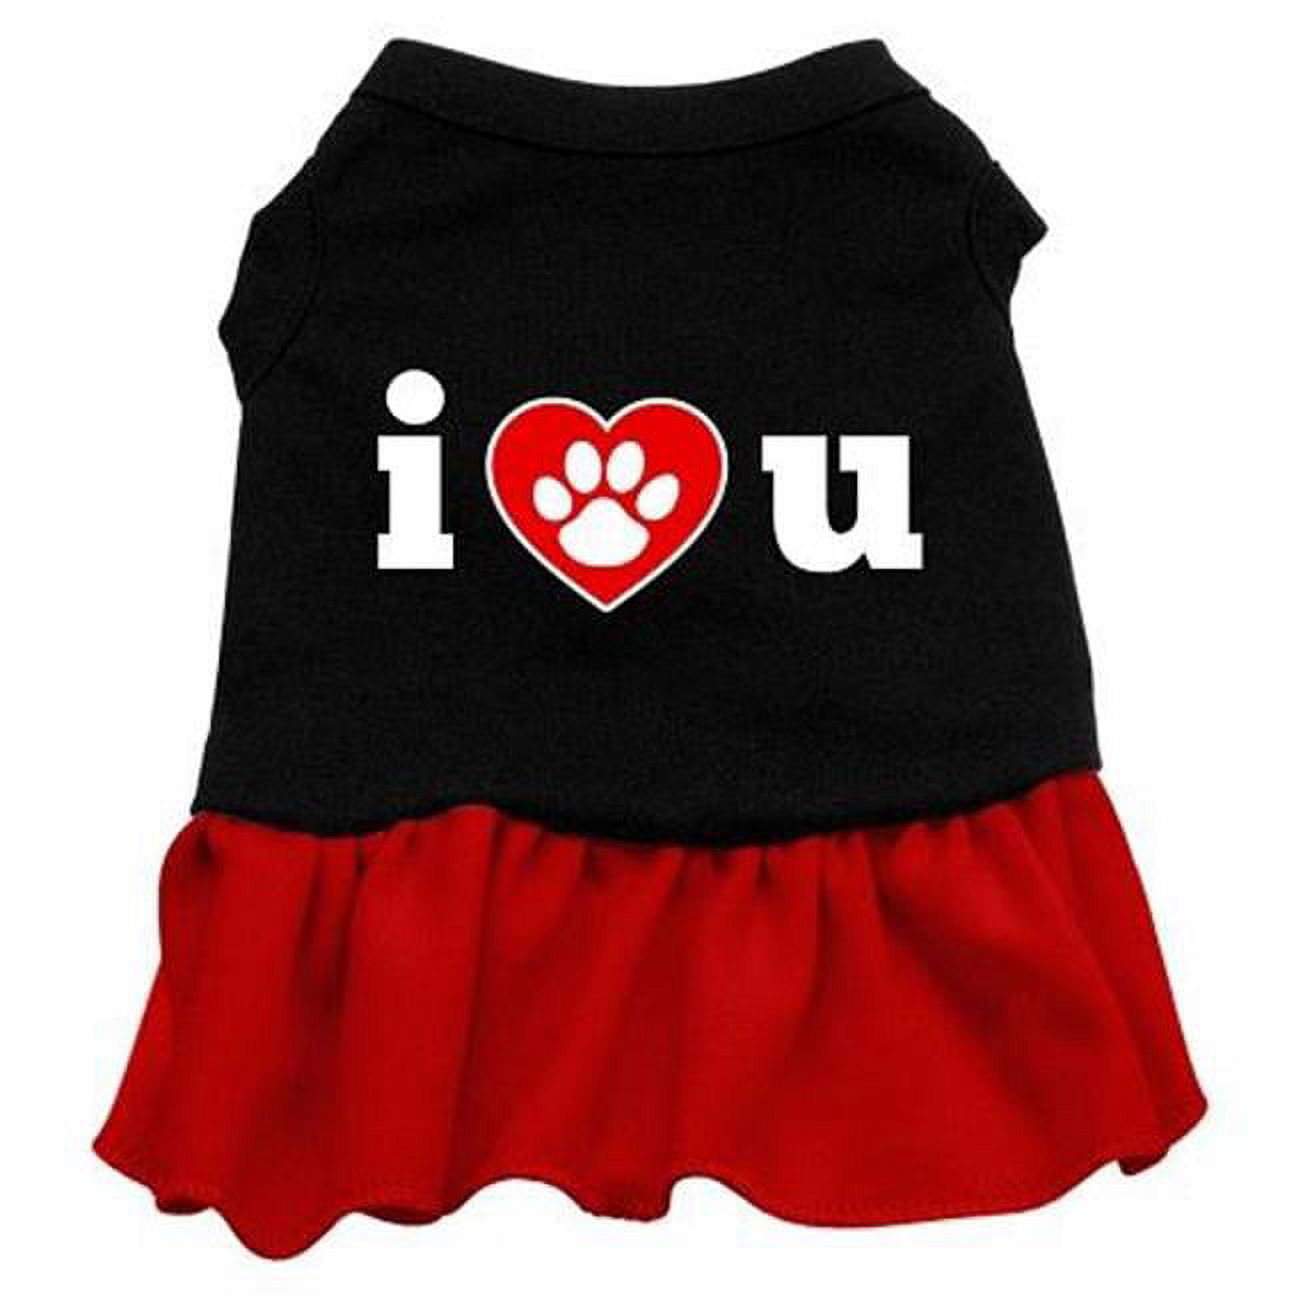 Mirage Pet I Heart You Screen Print Dog Dress Black with Red Lg - image 1 of 2